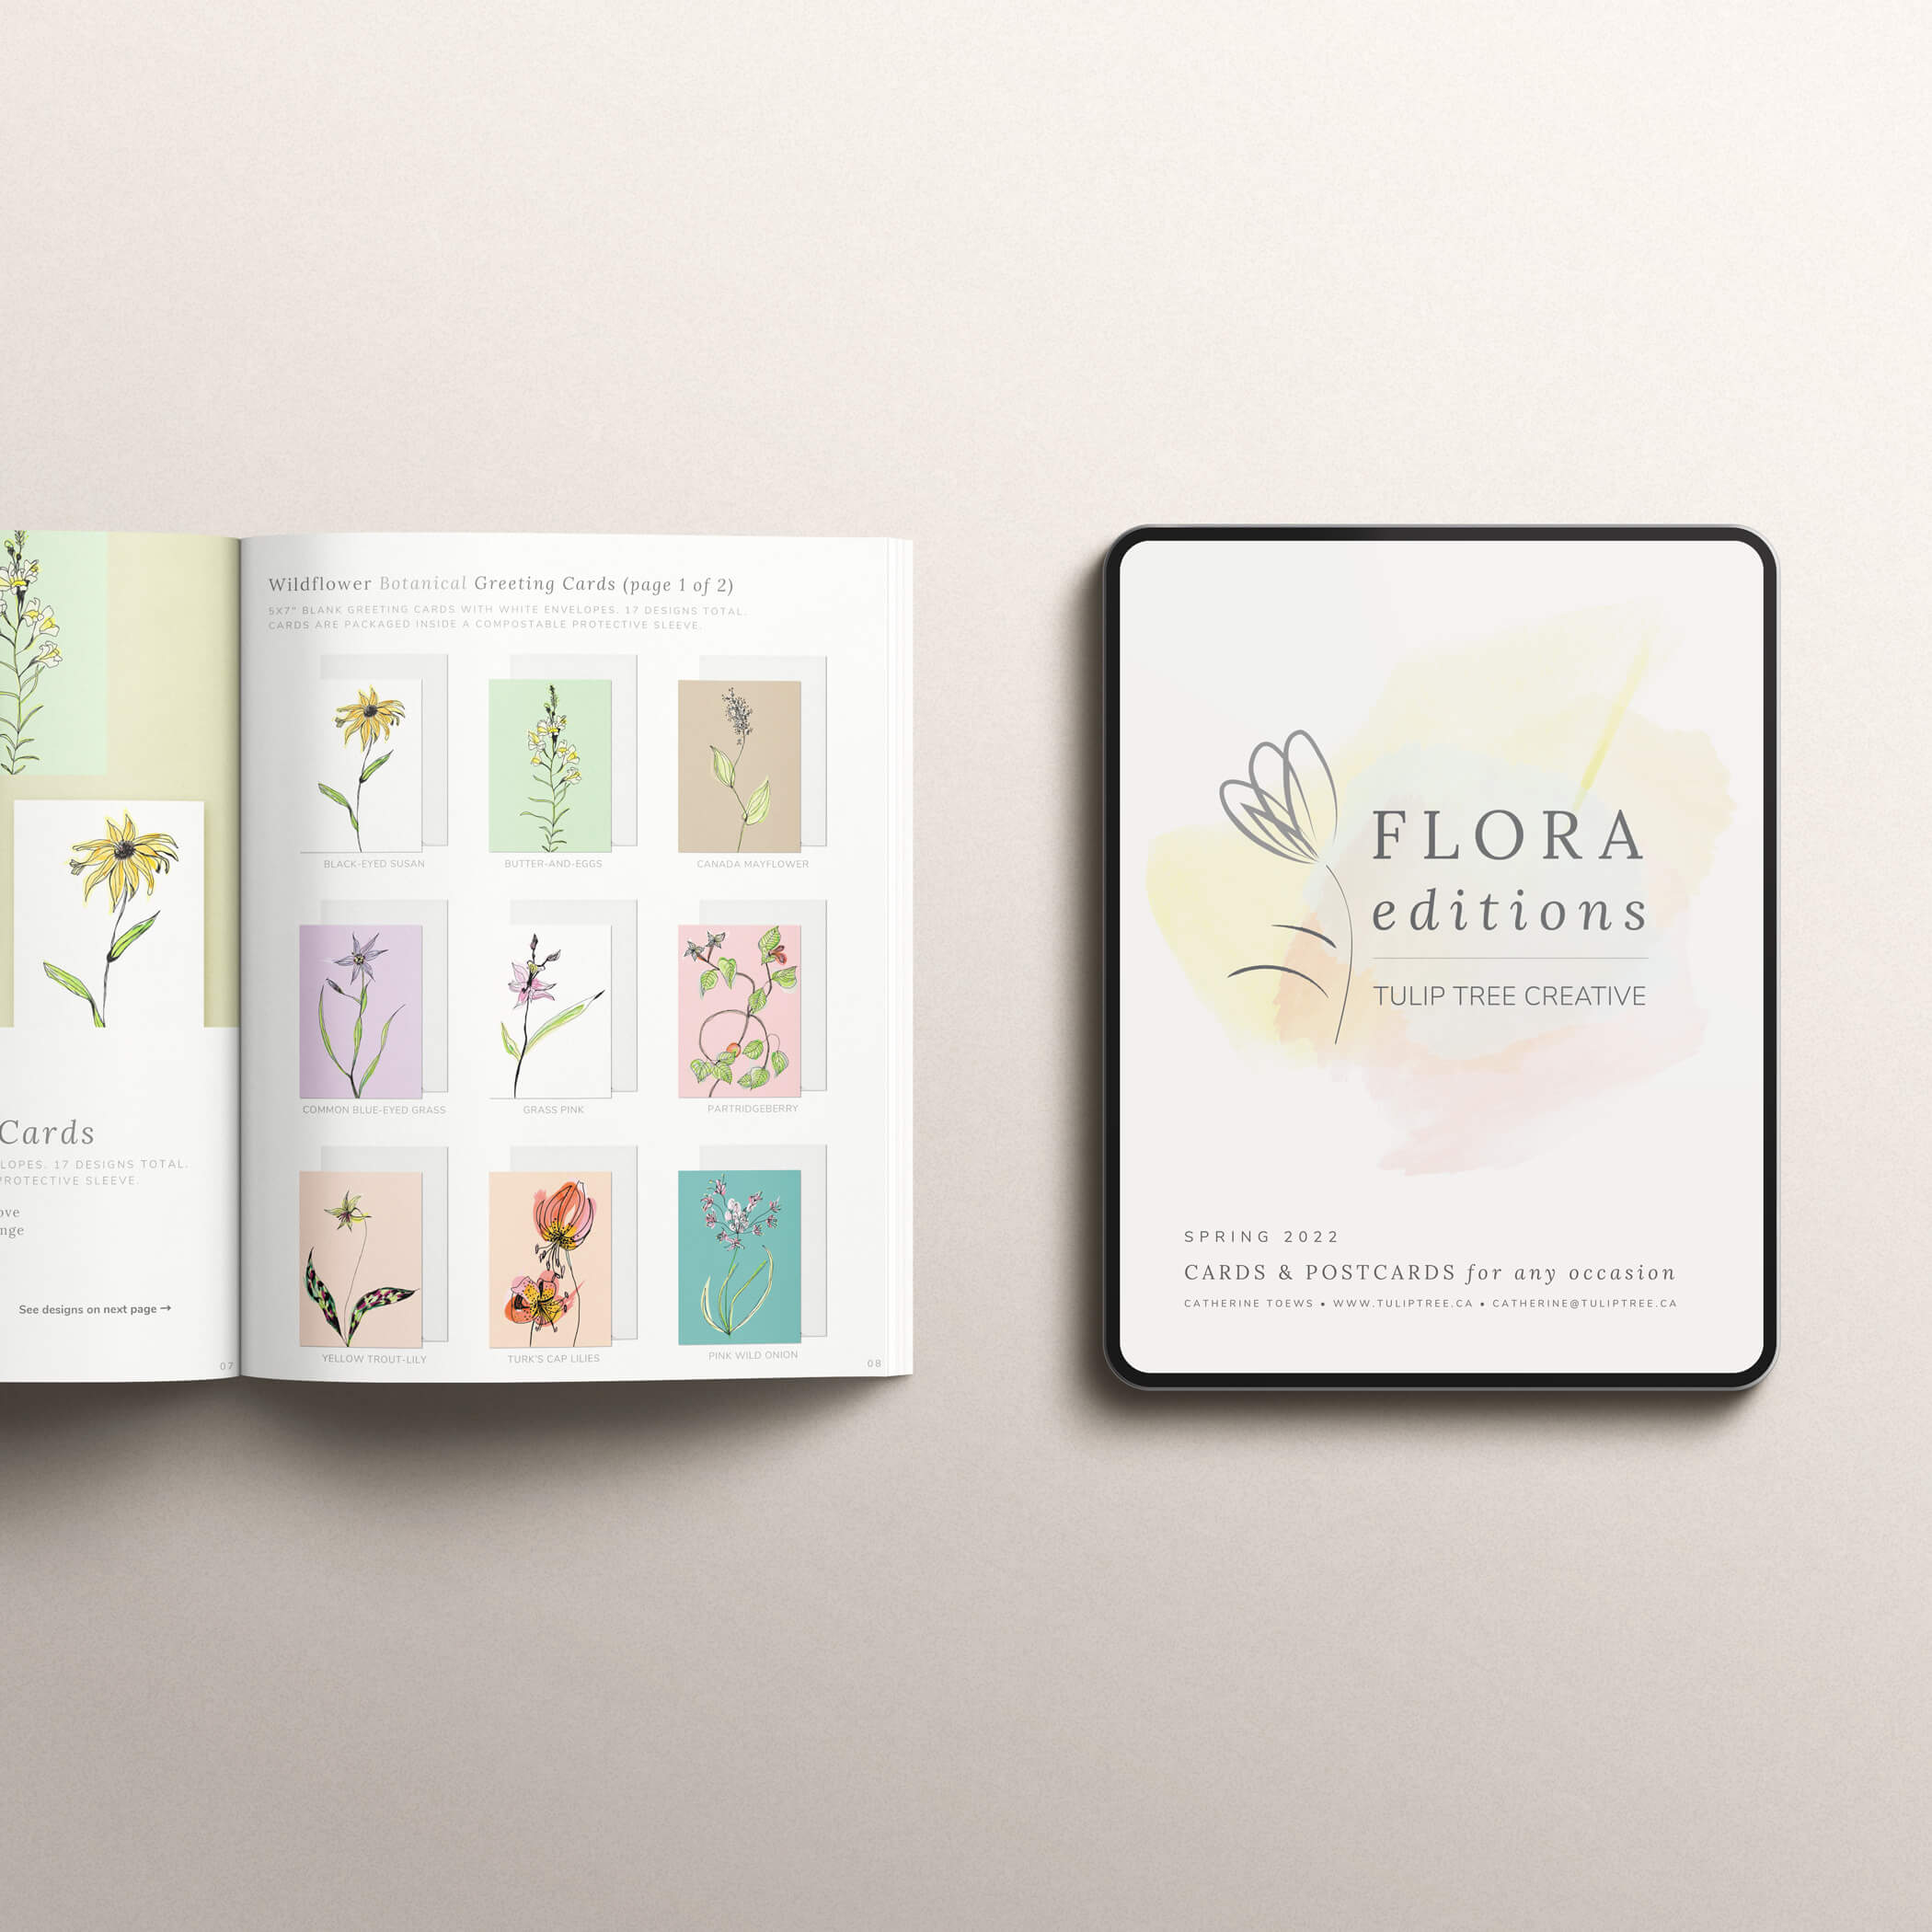 Catherine Toews FLORA editions Lookbook Cards and Postcards for Any Occasion